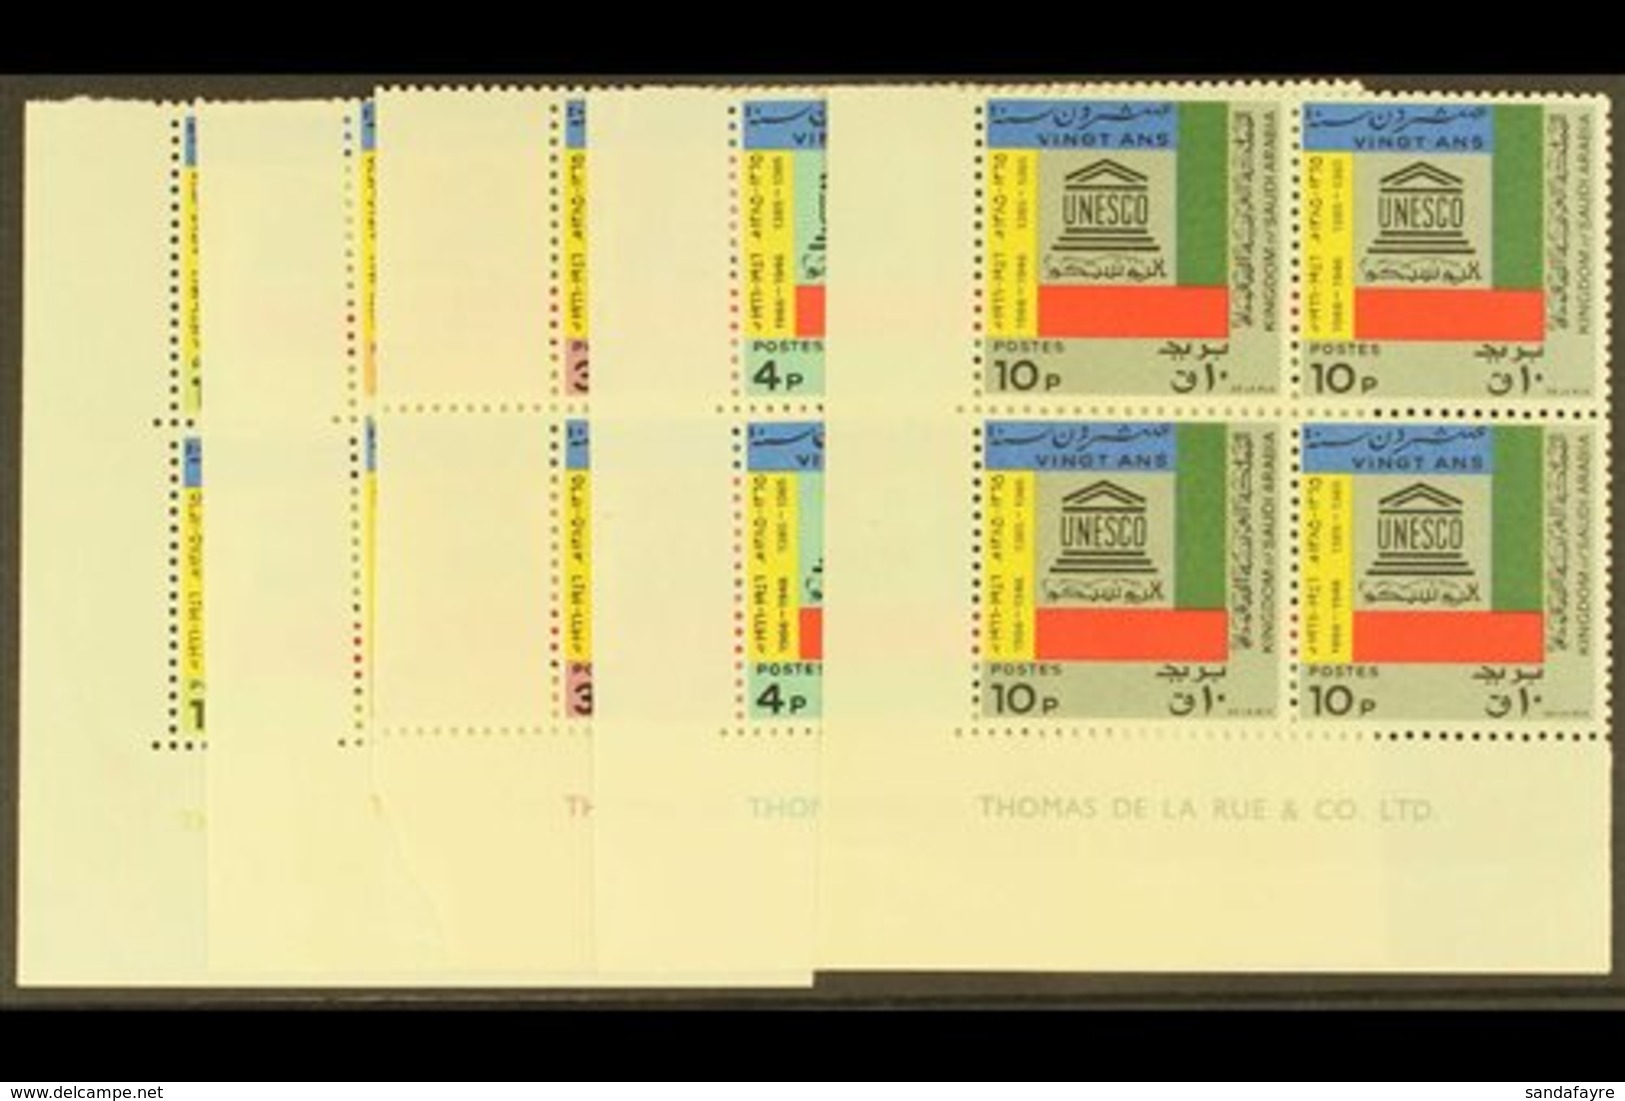 1966 20th Anniv Of UN Orgs, SG 650/654, In Superb Never Hinged Mint Corner Blocks Of 4. (20 Stamps) For More Images, Ple - Arabia Saudita